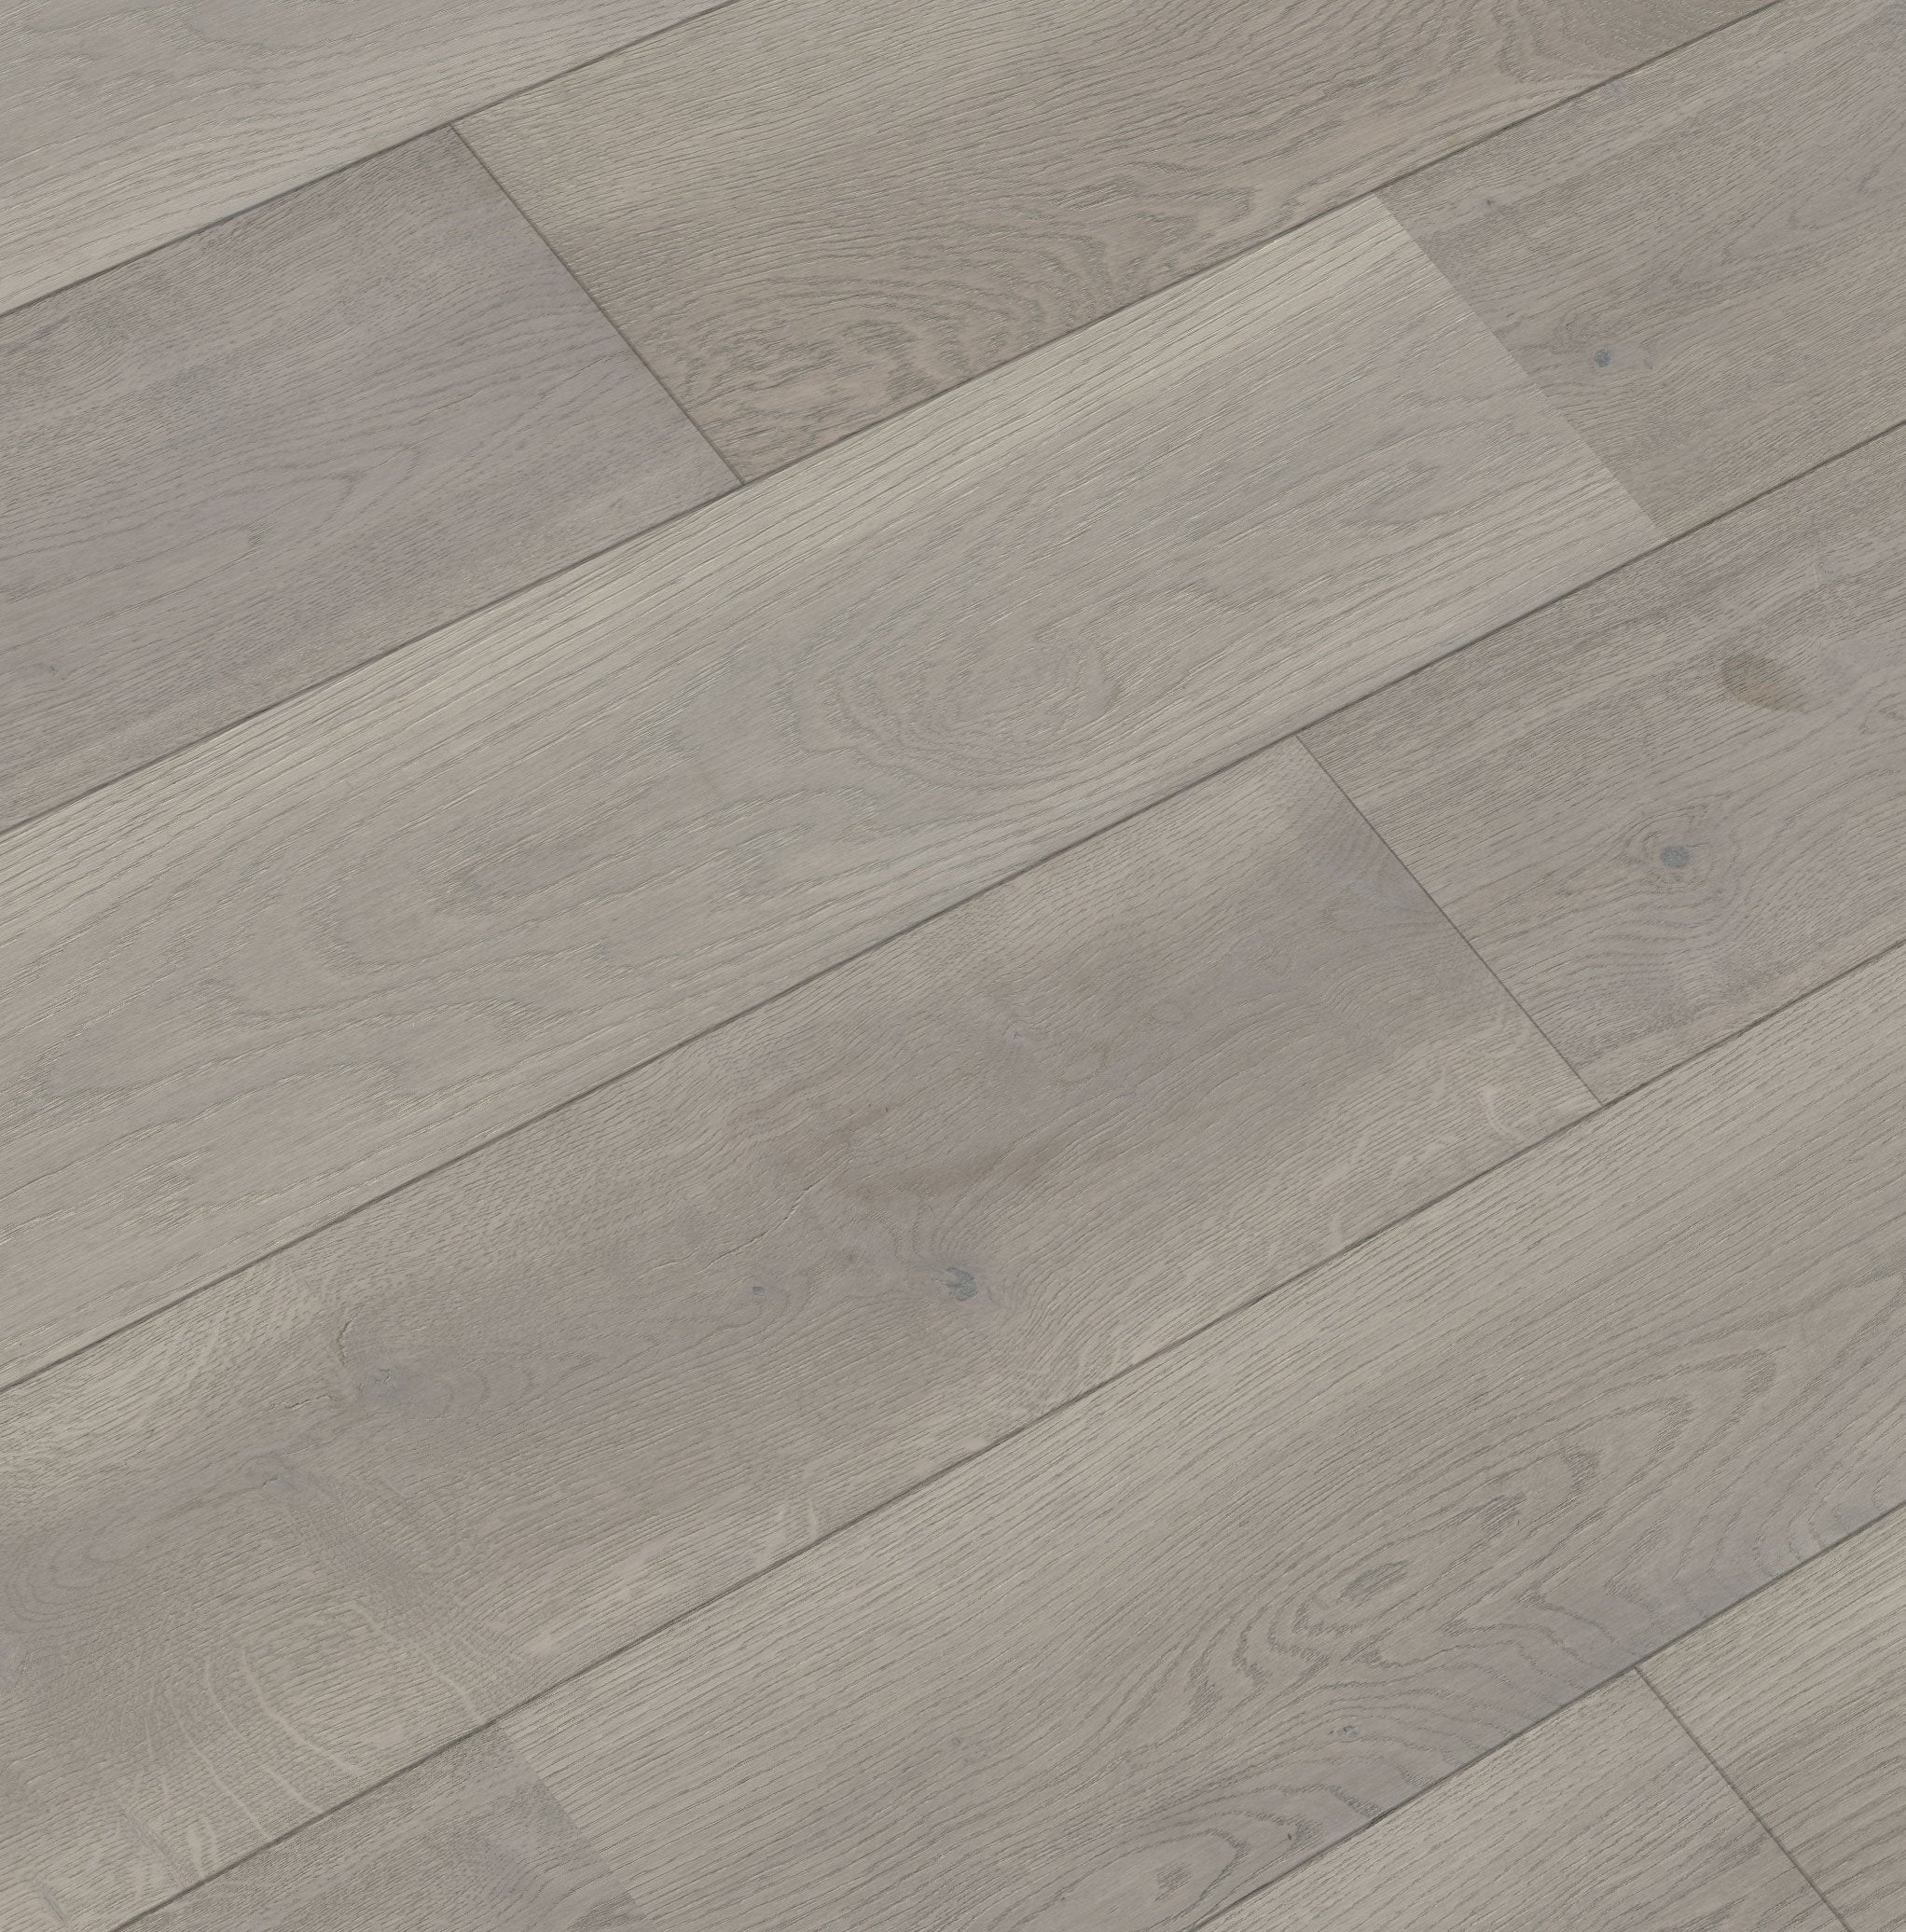 teka royal dover german french white oak natural hardwood flooring plank stain light grey distributed by surface group international